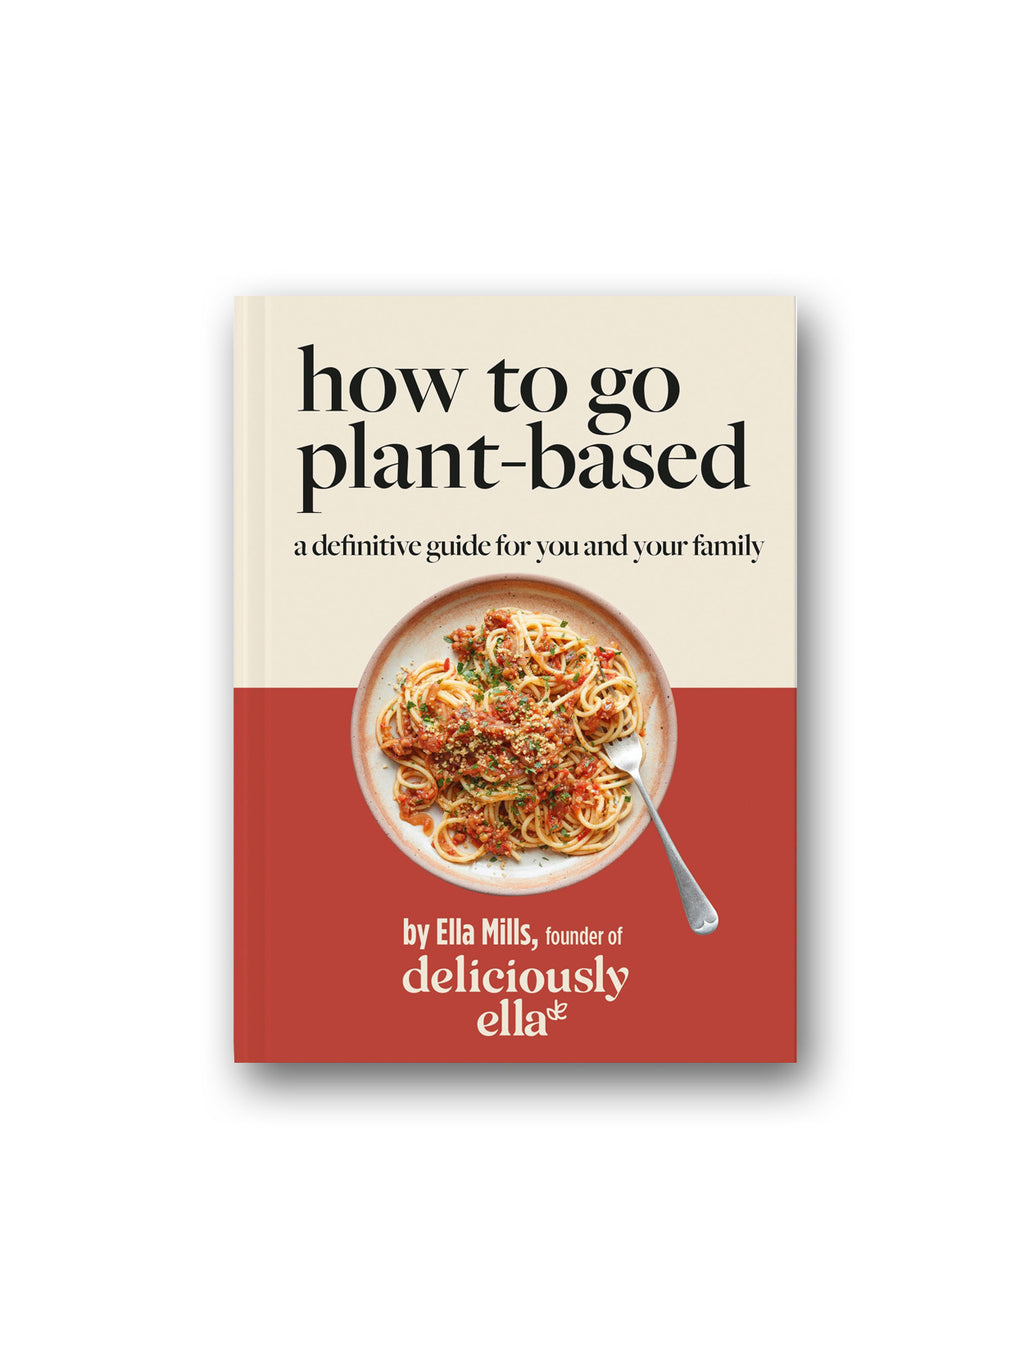 How To Go Plant-Based: A Definitive Guide For You and Your Family